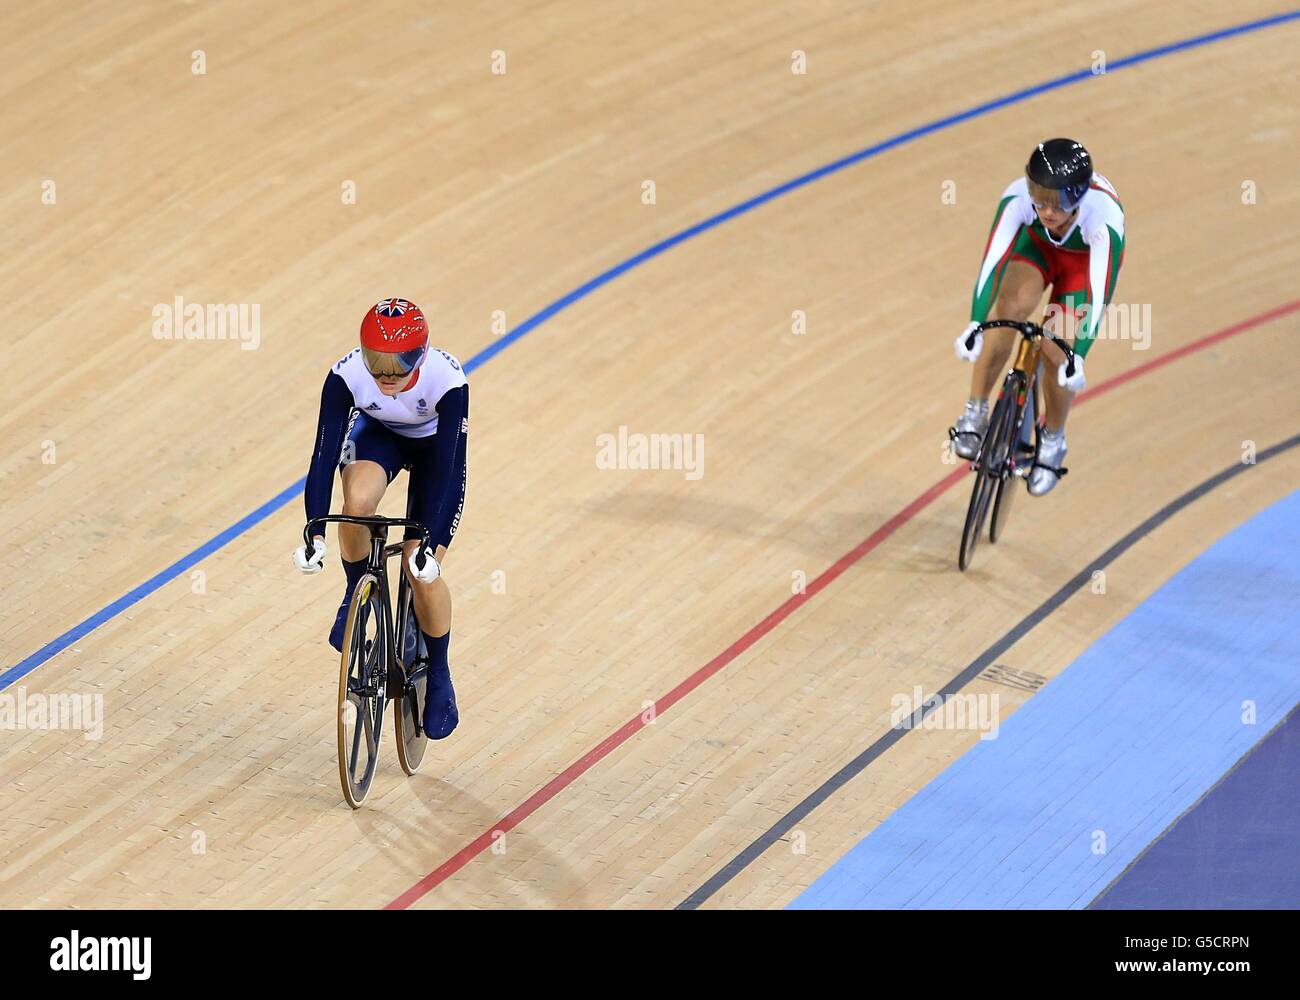 Great Britain's Victoria Pendleton (left) leads Belarus' Olga Panarina during the Womens Sprint Quarter Final Race 1 at the Velodrome in the Olympic Park, on the tenth day of the London 2012 Olympics. Stock Photo